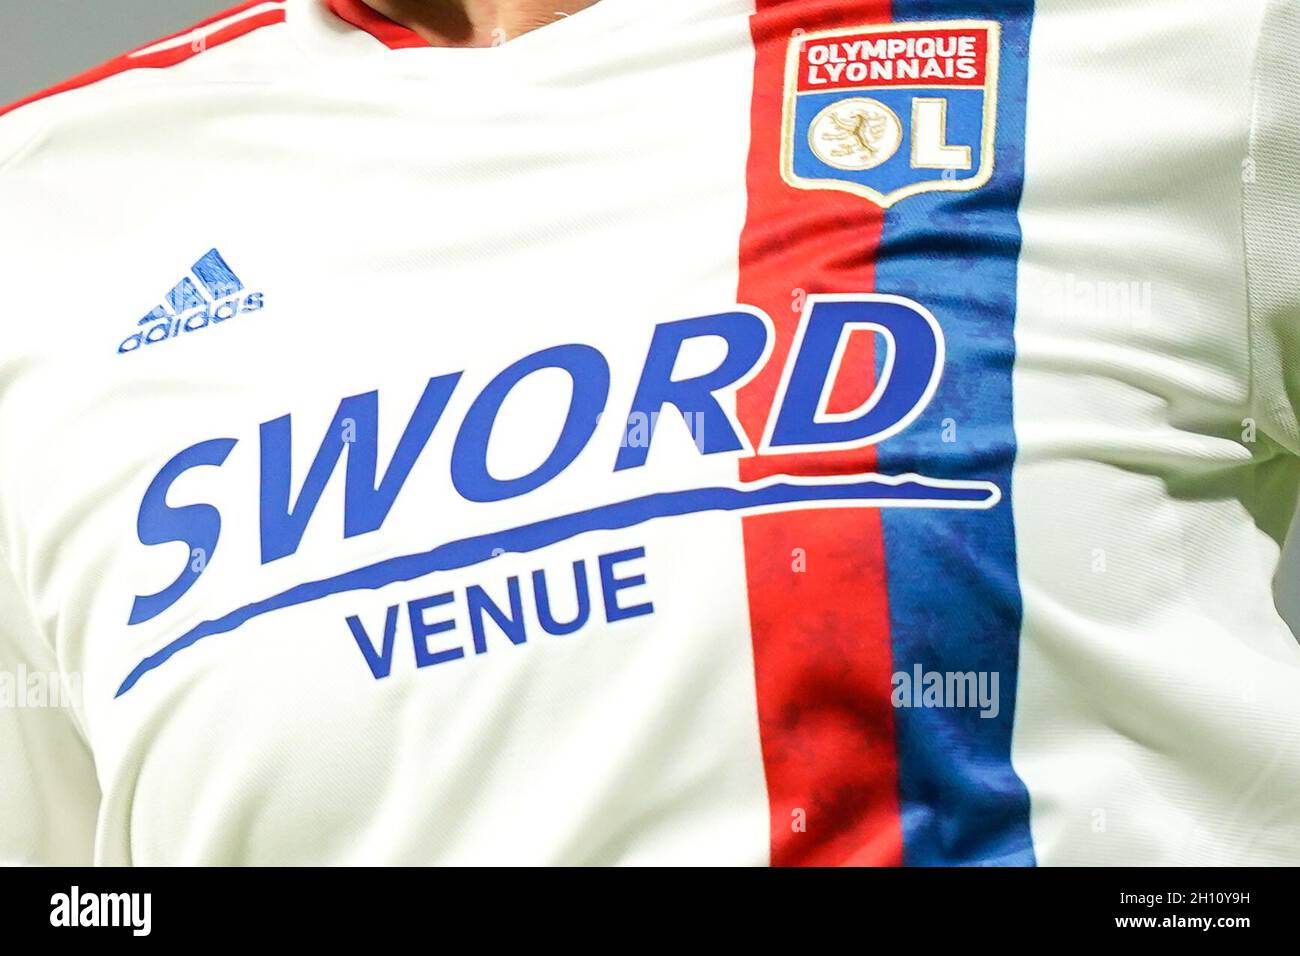 Lyon, France. 14th Oct, 2021. Olympique Lyonnais Shirt with logo (Sword and  Adidas) during the UEFA Womens Champions League Group stage round 2  football match between Olympique Lyonnais and SL Benfica at